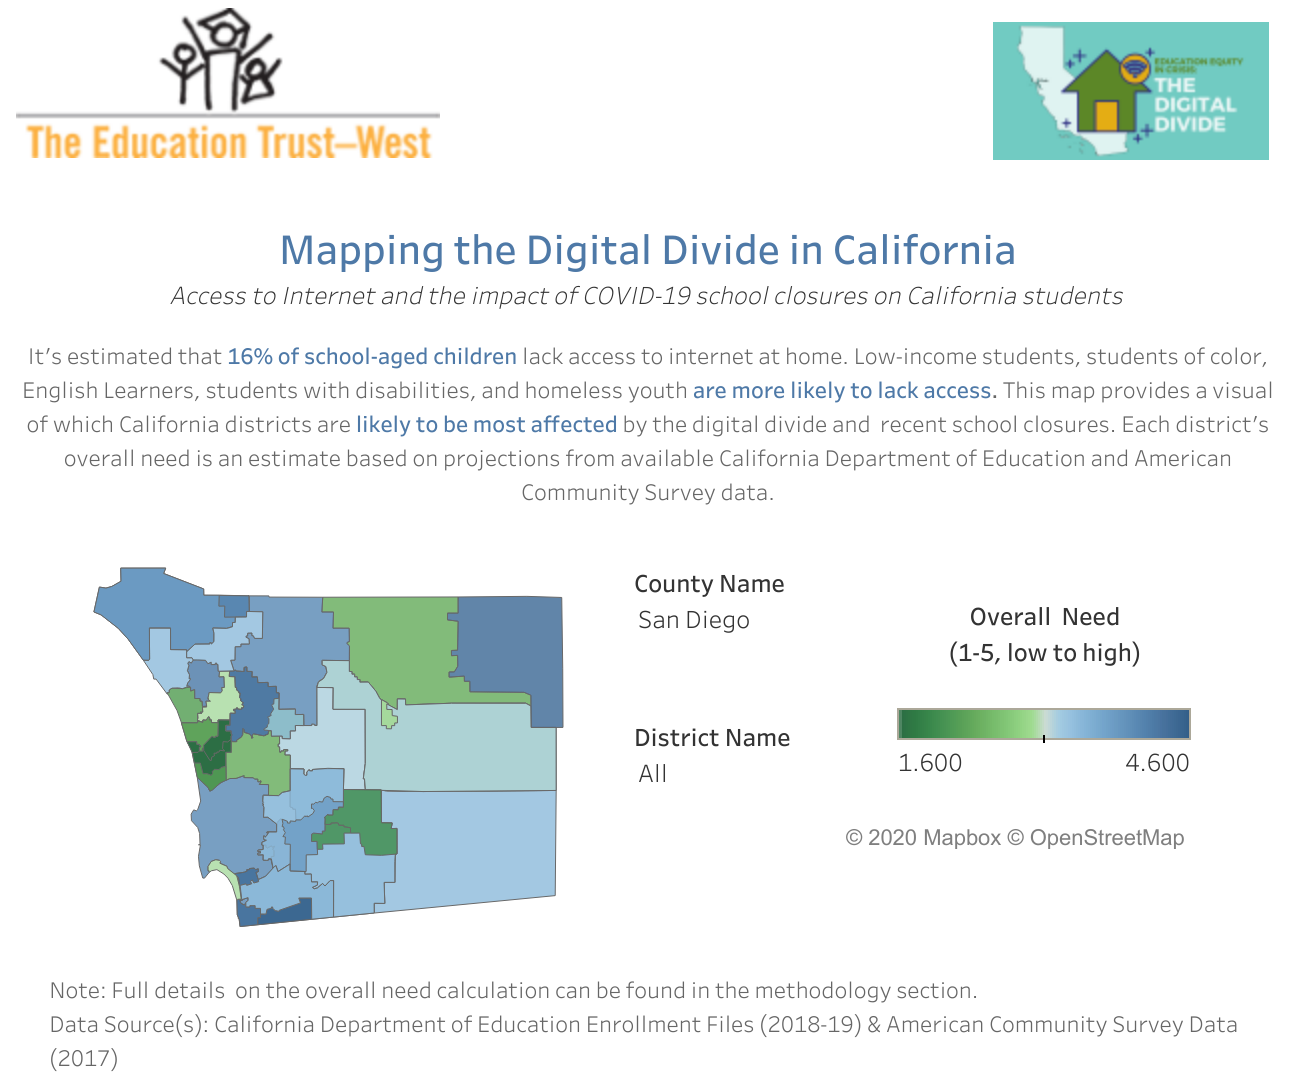 Mapping the Digital Divide in California